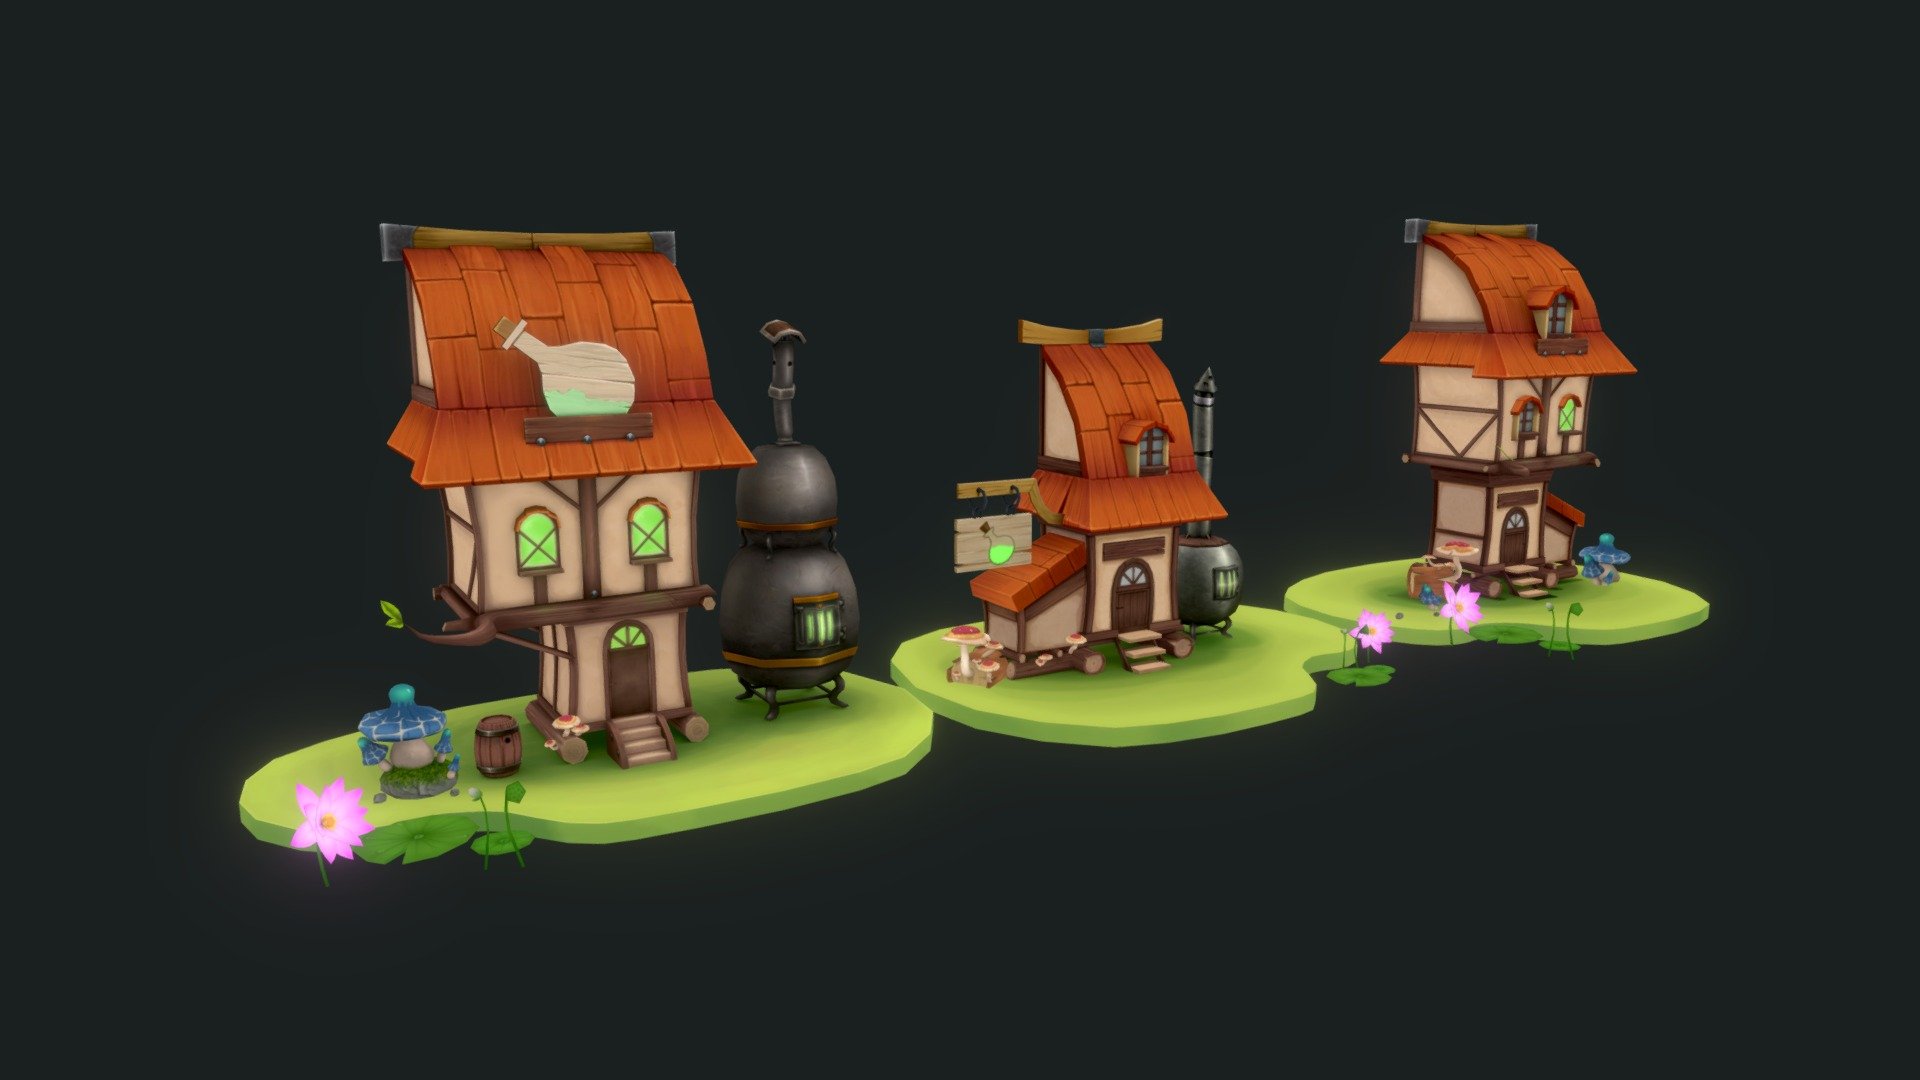 Lowpoly handpaint texture by CGArt Team

http://polycount.com/discussion/173191/handpaint-lowpoly-for-mobile-game#latest

https://www.facebook.com/cgavn/

https://www.artstation.com/artwork/LxaJr - HousePotion - 3D model by cgart.com (@goart) 3d model